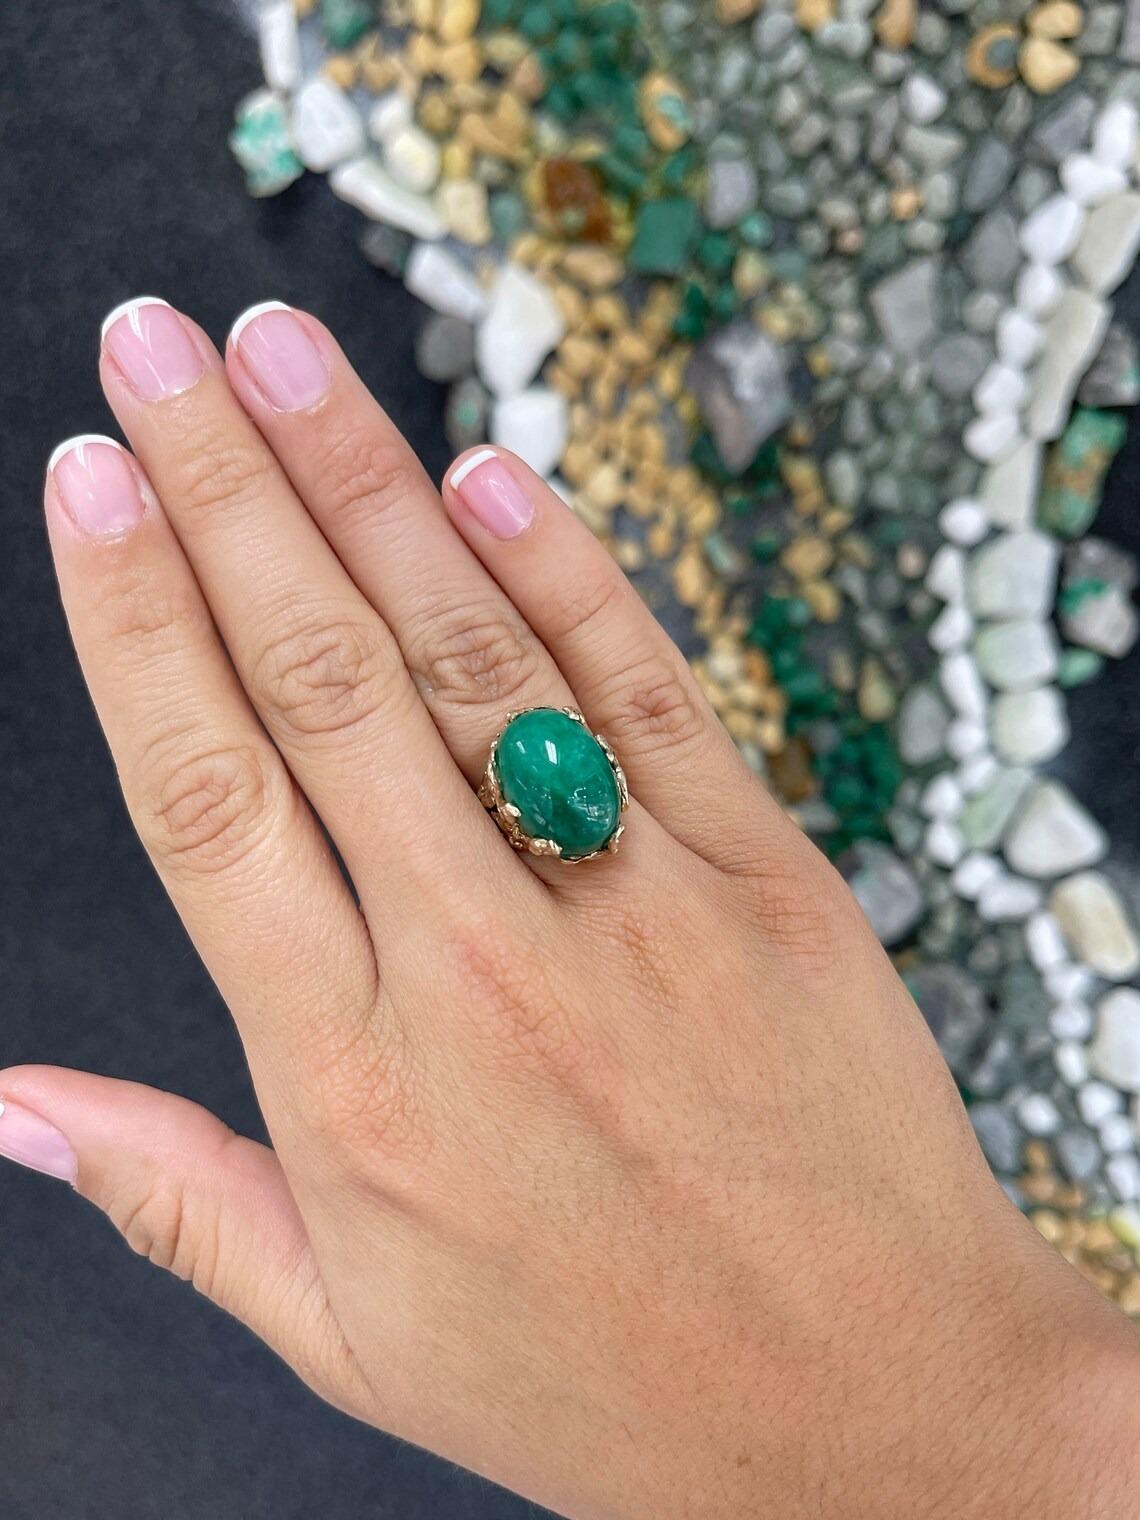 Oval Cut 19ct 14K Dark Green Oval Cabochon Cut Colombian Emerald Solitaire Nugget Ring For Sale